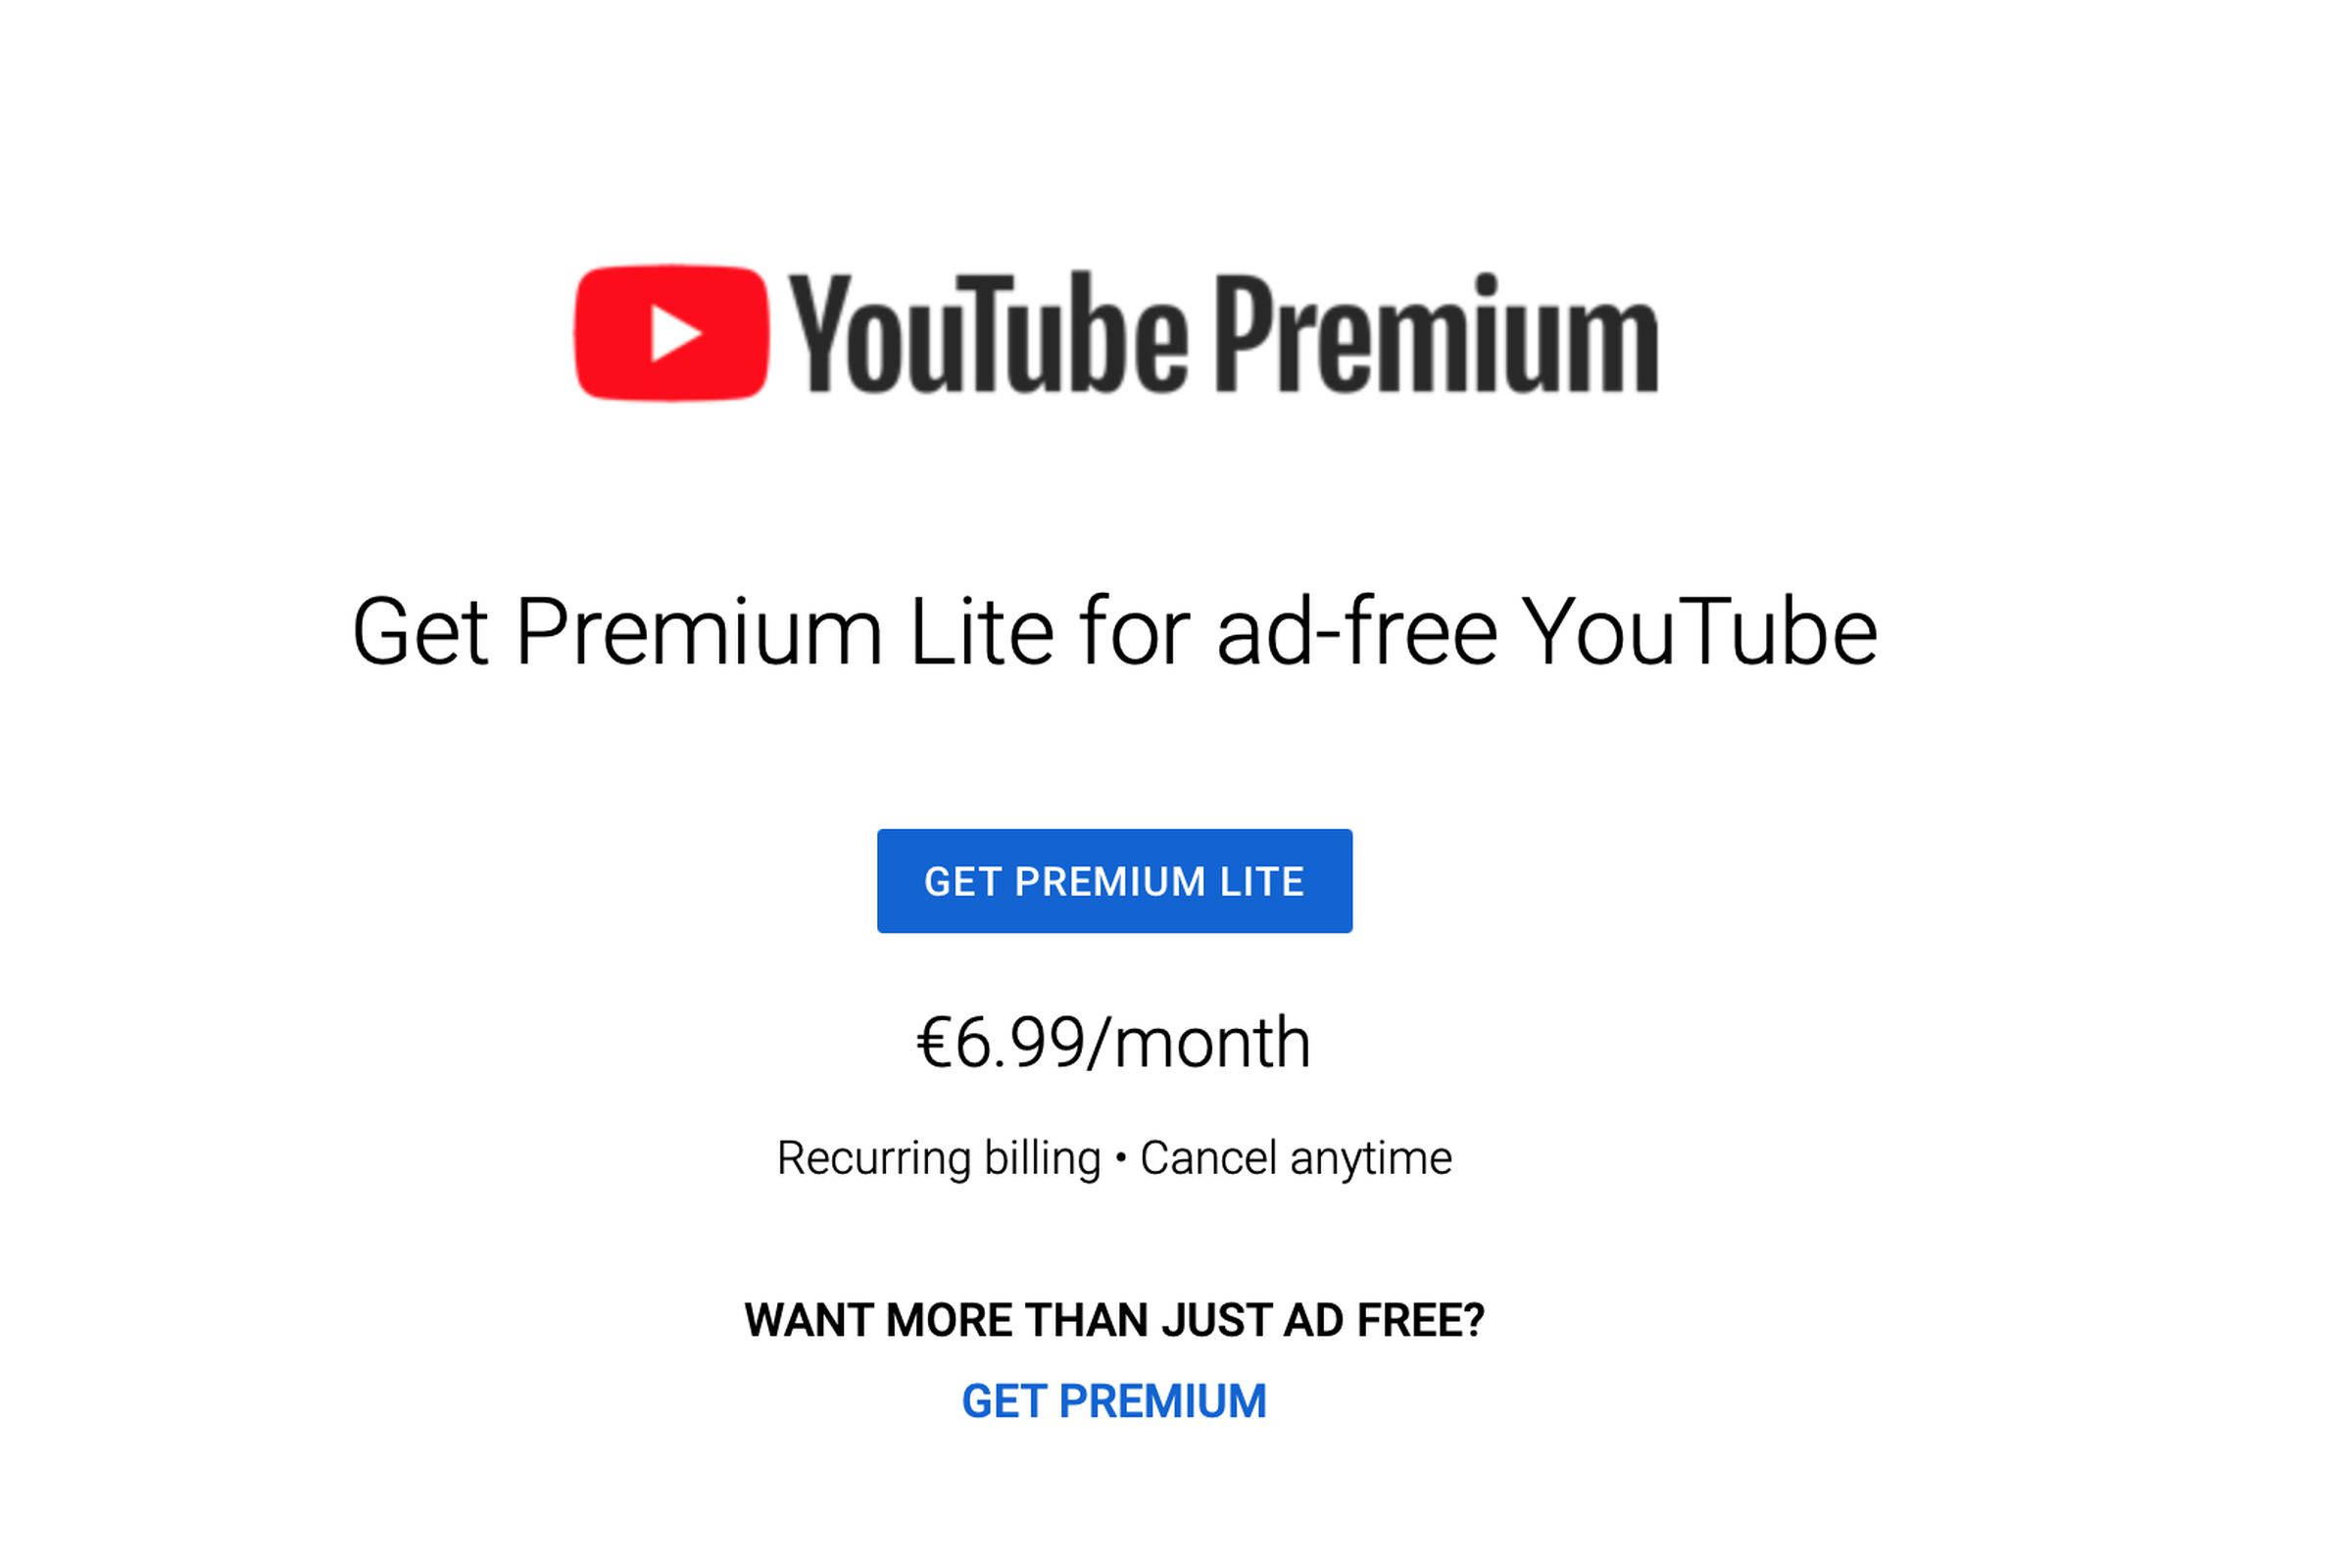 Premium Lite offers ad-free viewing at a lower price.